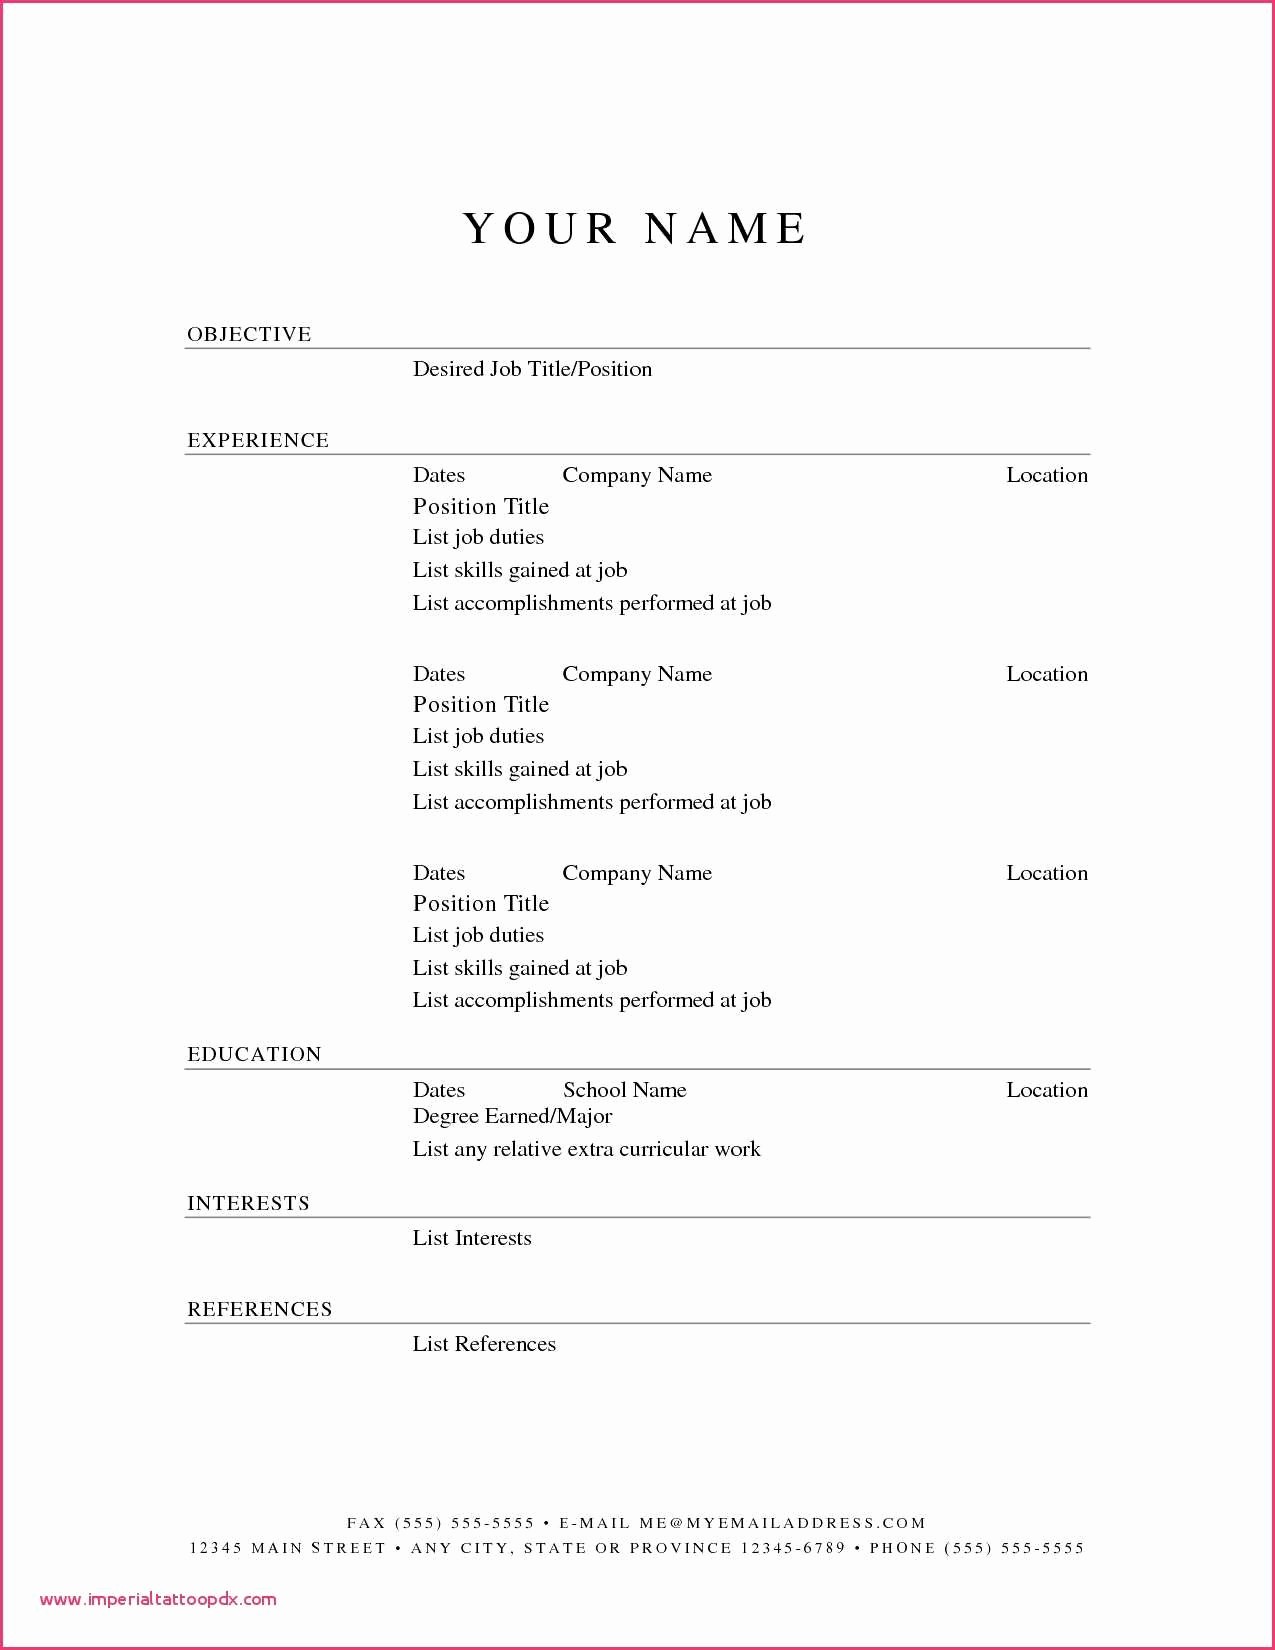 Ms Word 2007 Resume Templates Beautiful 46 Resume Template Download for Microsoft Word 2007